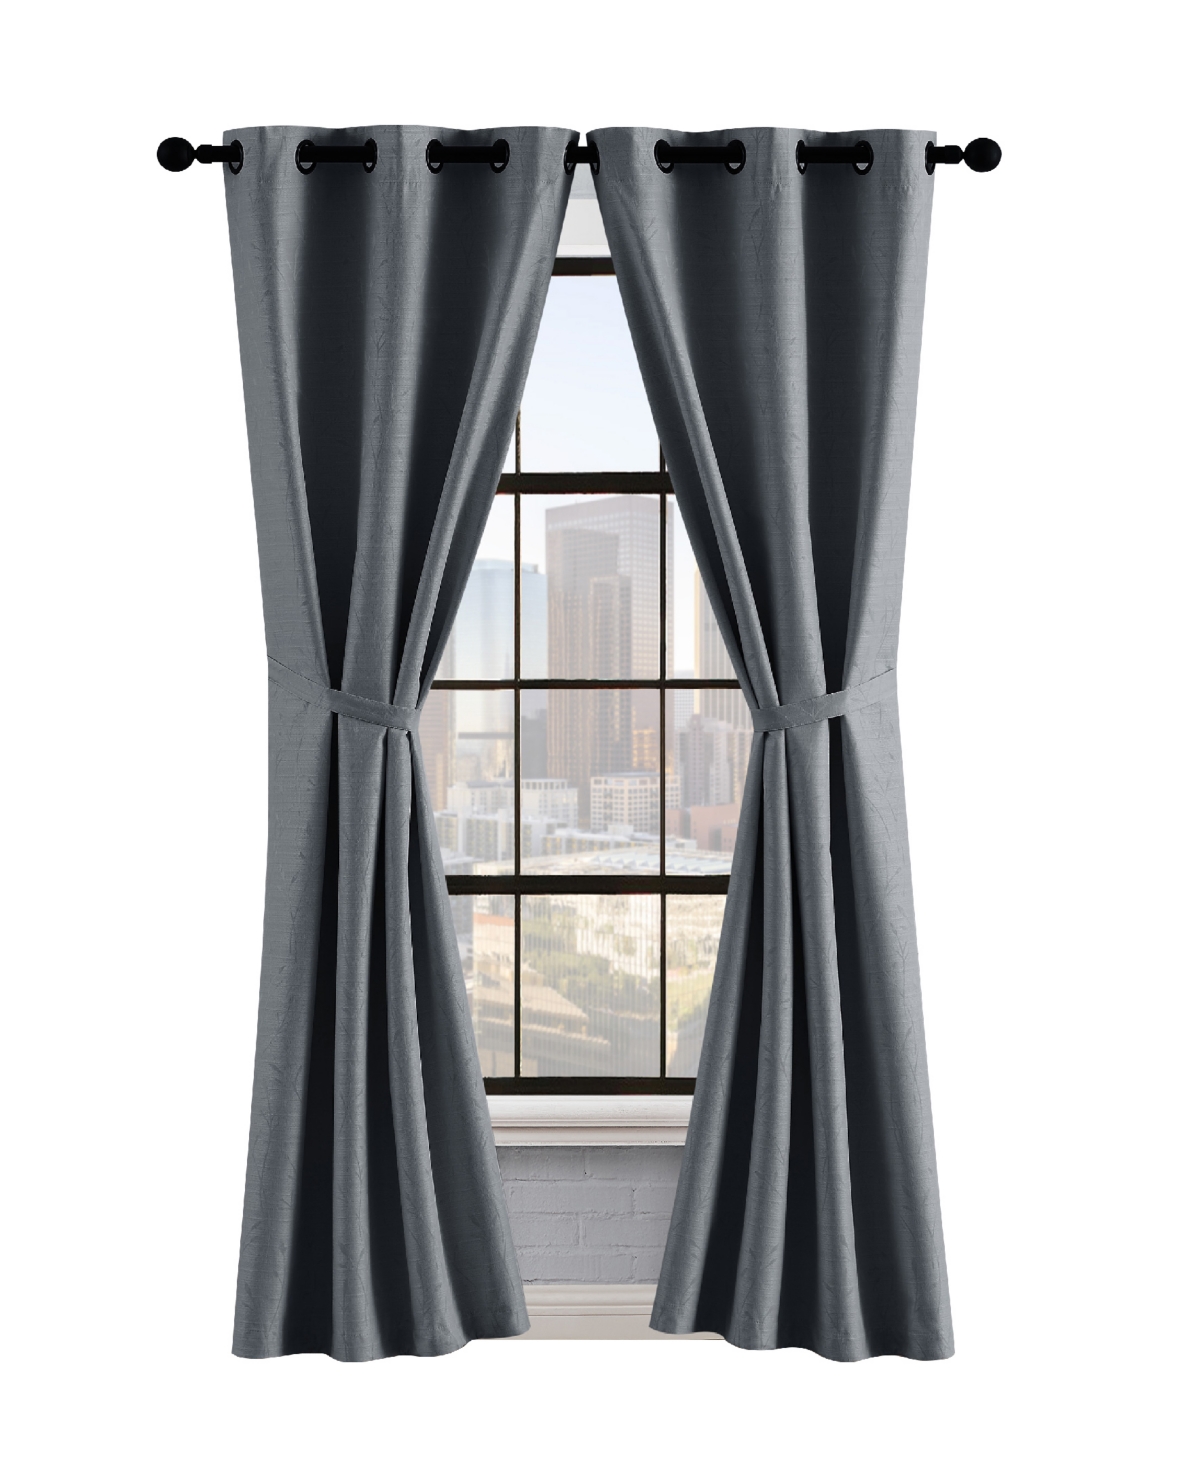 Lucky Brand Sondra Textured Leaf Pattern Blackout Grommet Window Curtain Panel Pair With Tiebacks, 38" X 96" In Gray